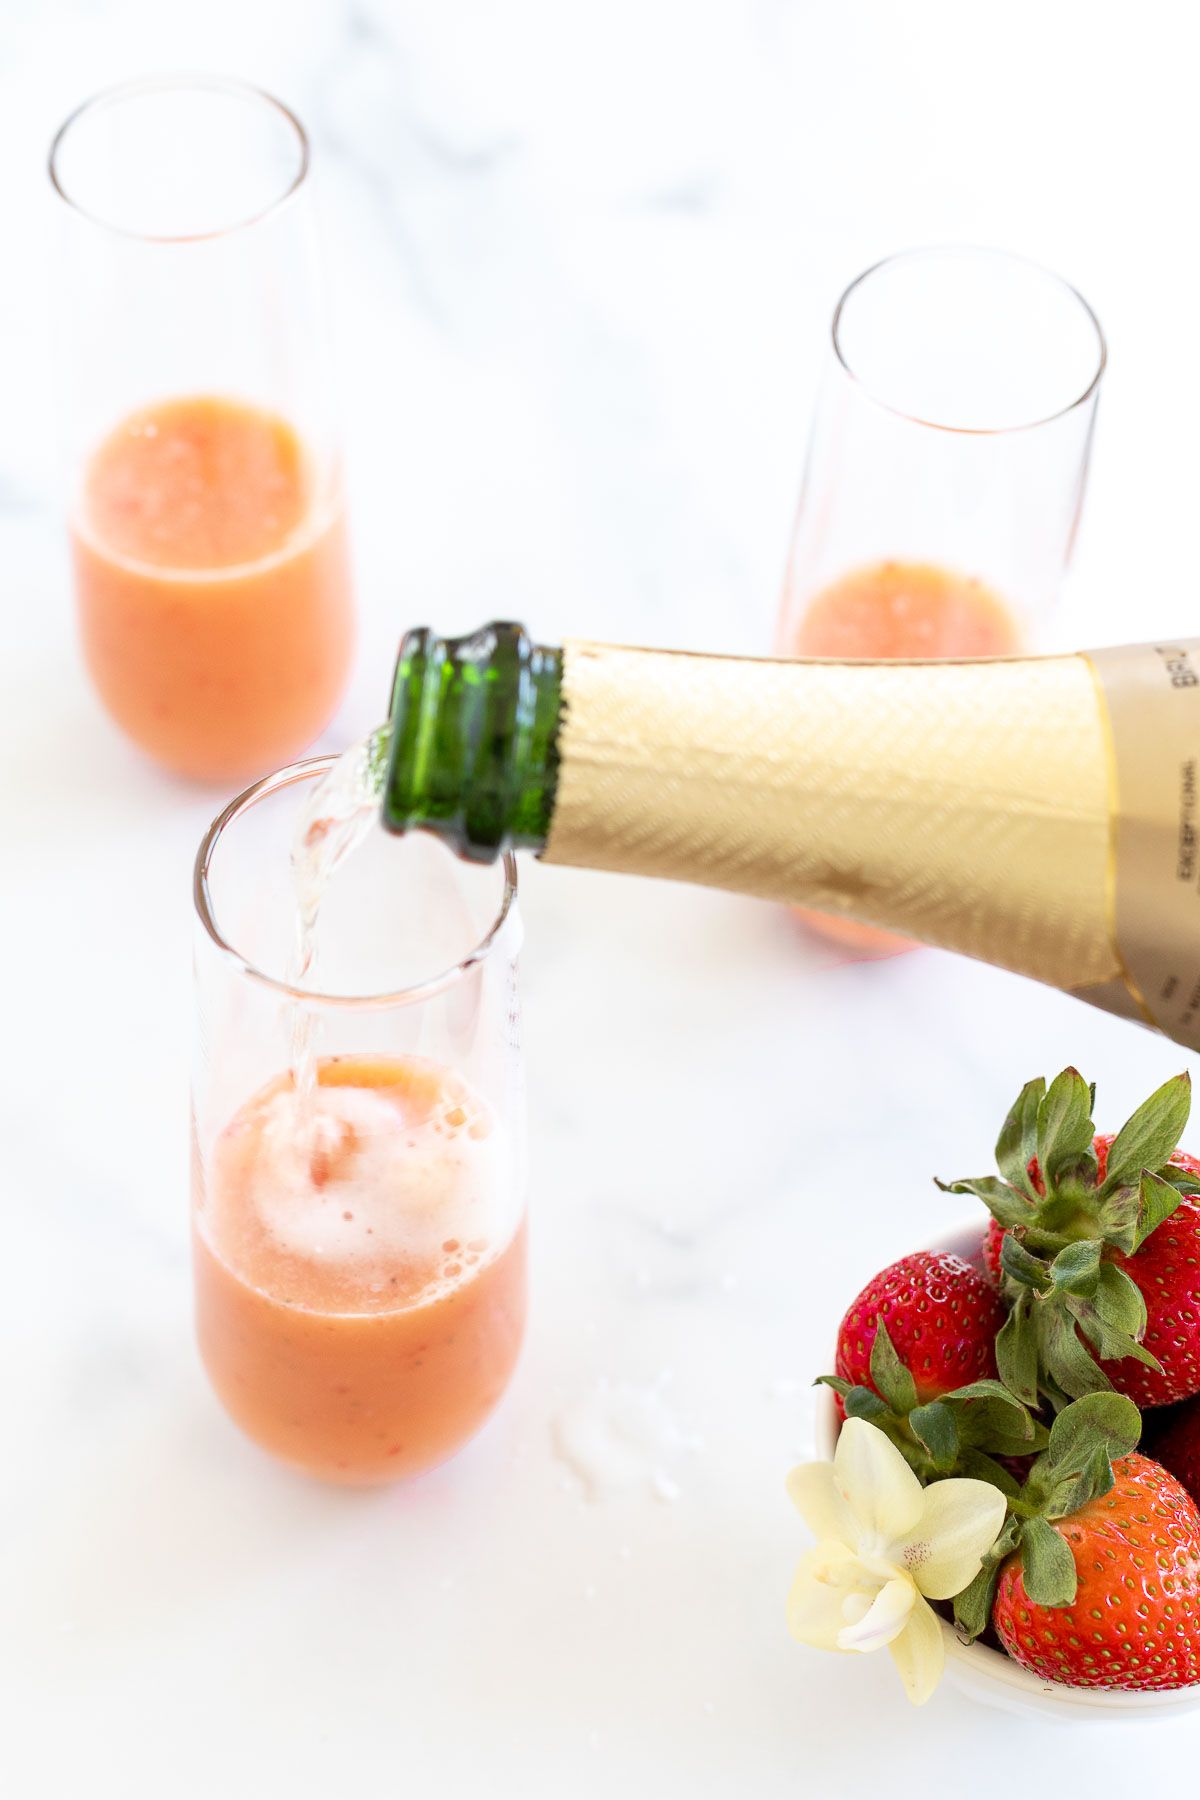 A bottle of Champagne pouring into strawberry mimosas, with a bowl of strawberries on the side